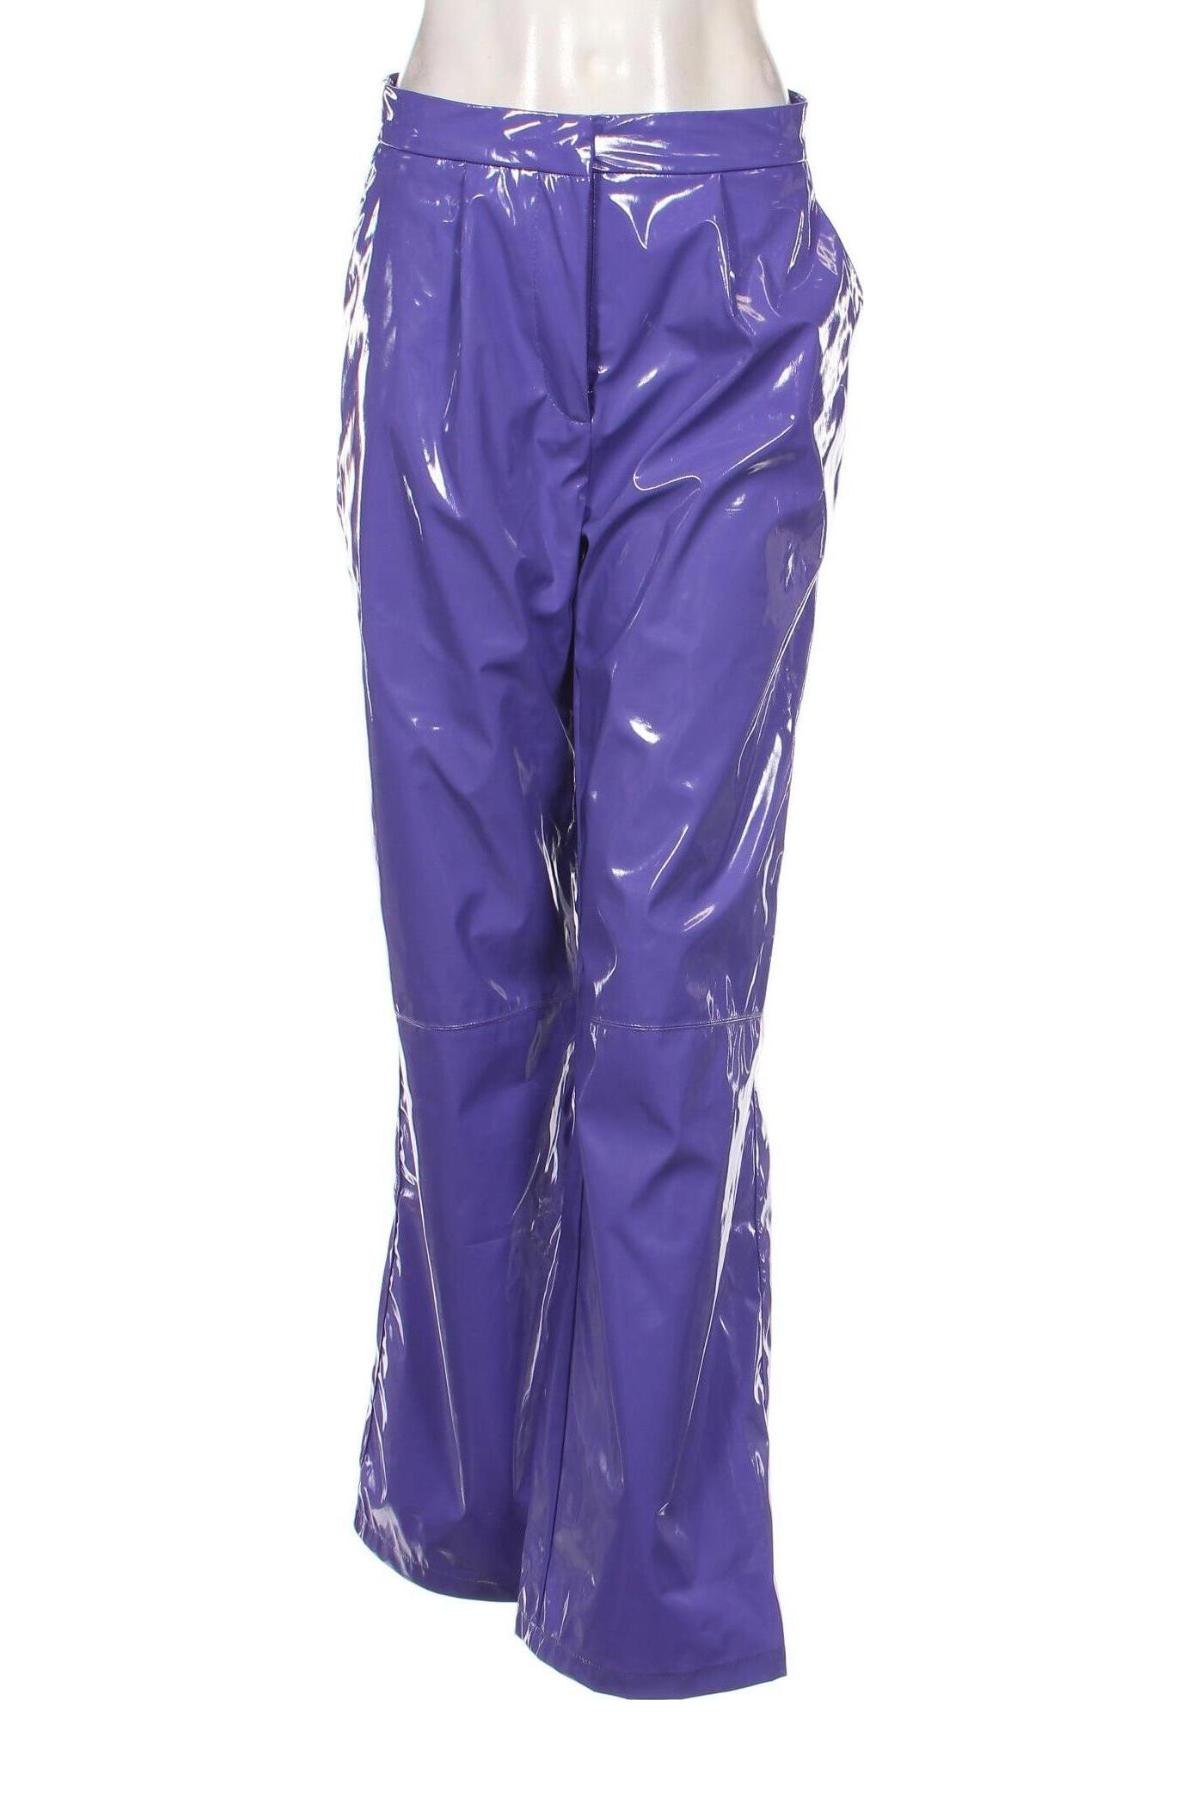 Damenhose Katy Perry exclusive for ABOUT YOU, Größe XL, Farbe Lila, Preis 23,97 €